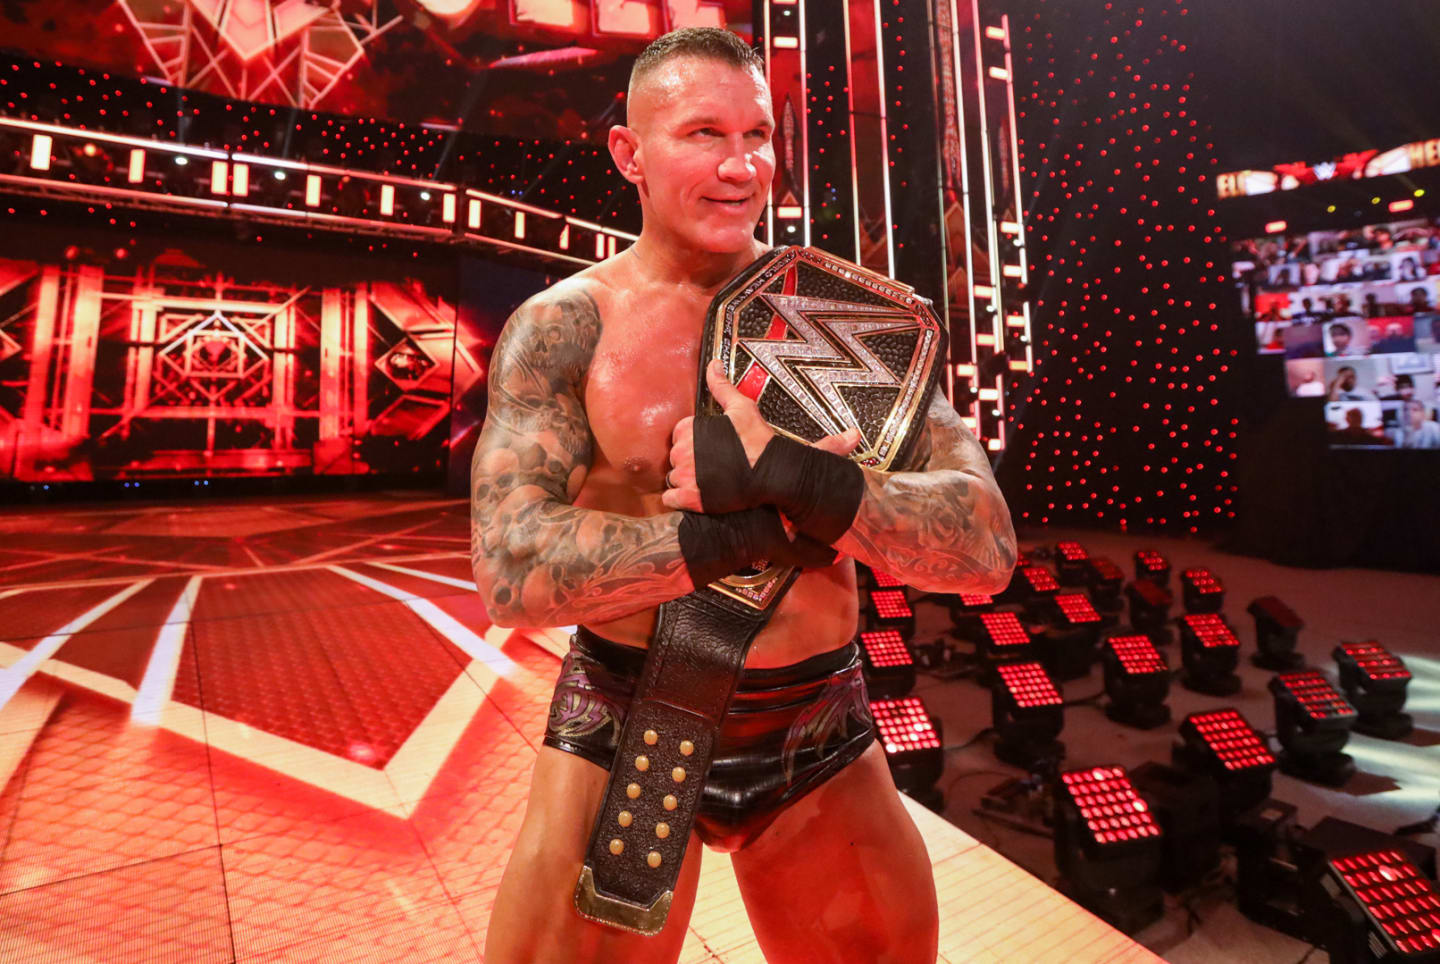 Randy Orton is now third place in the WWE Championship record.